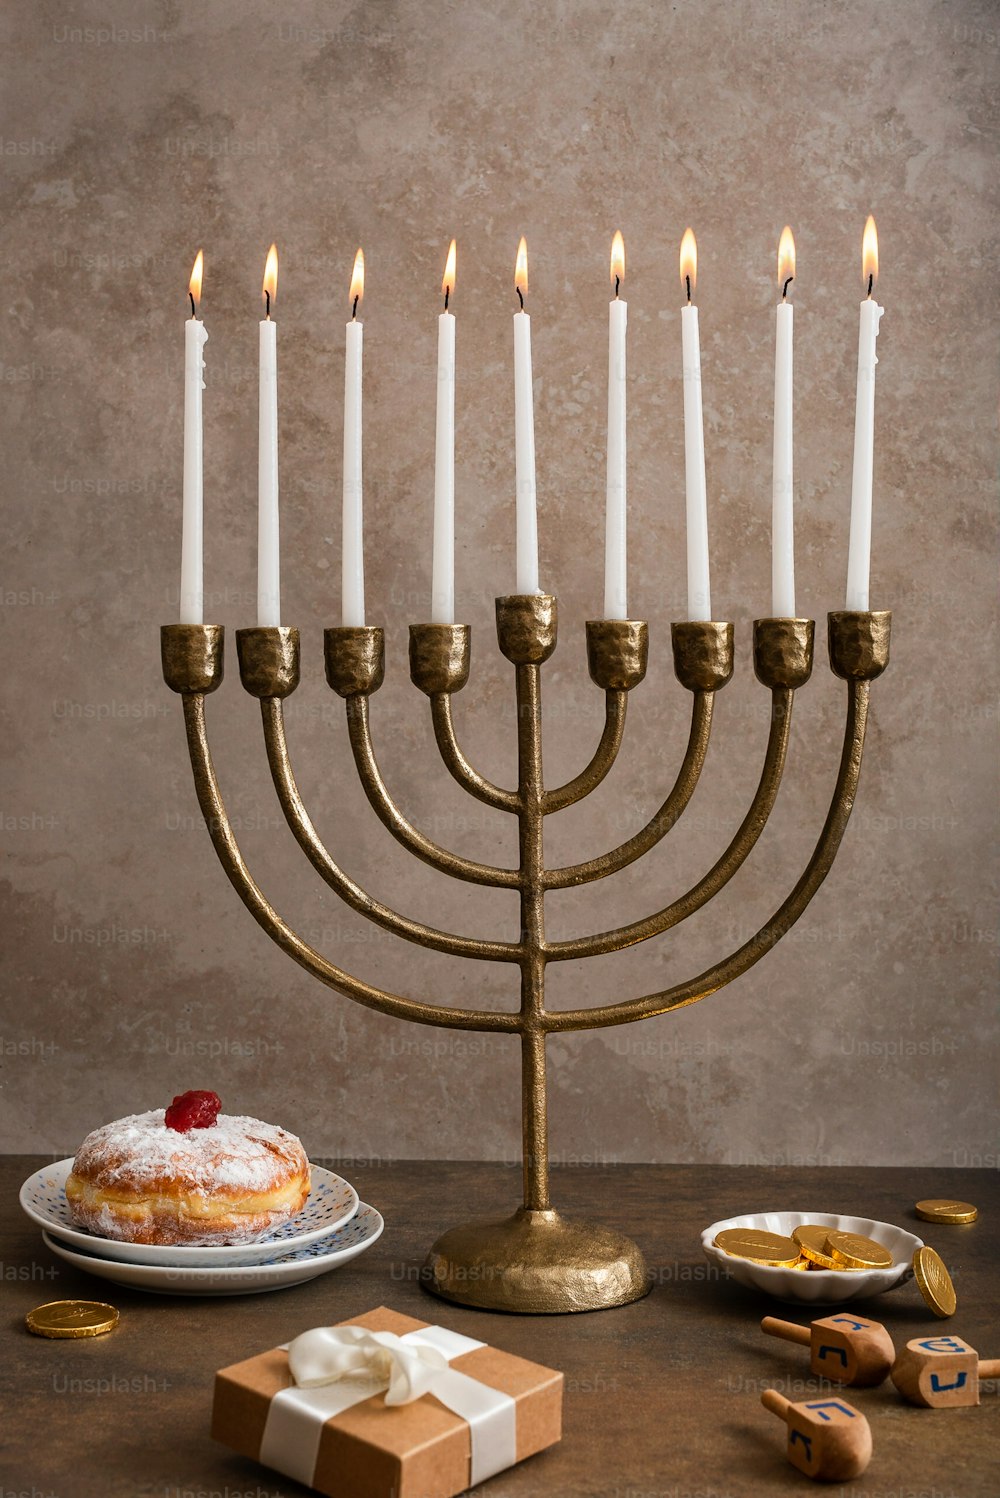 a menorah with lit candles and a cake on a plate